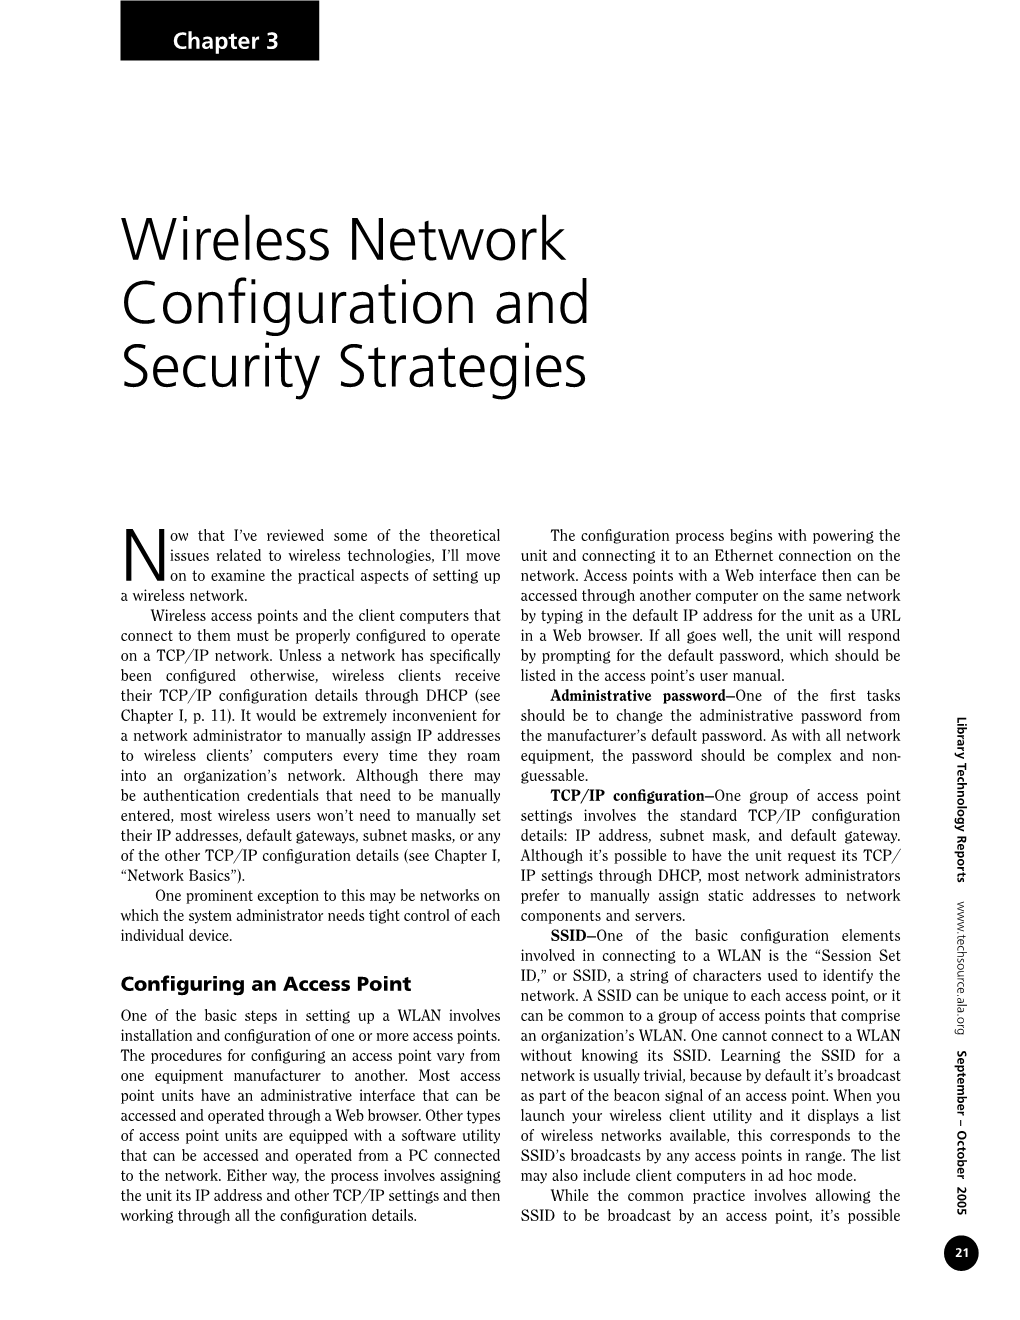 Wireless Network Configuration and Security Strategies